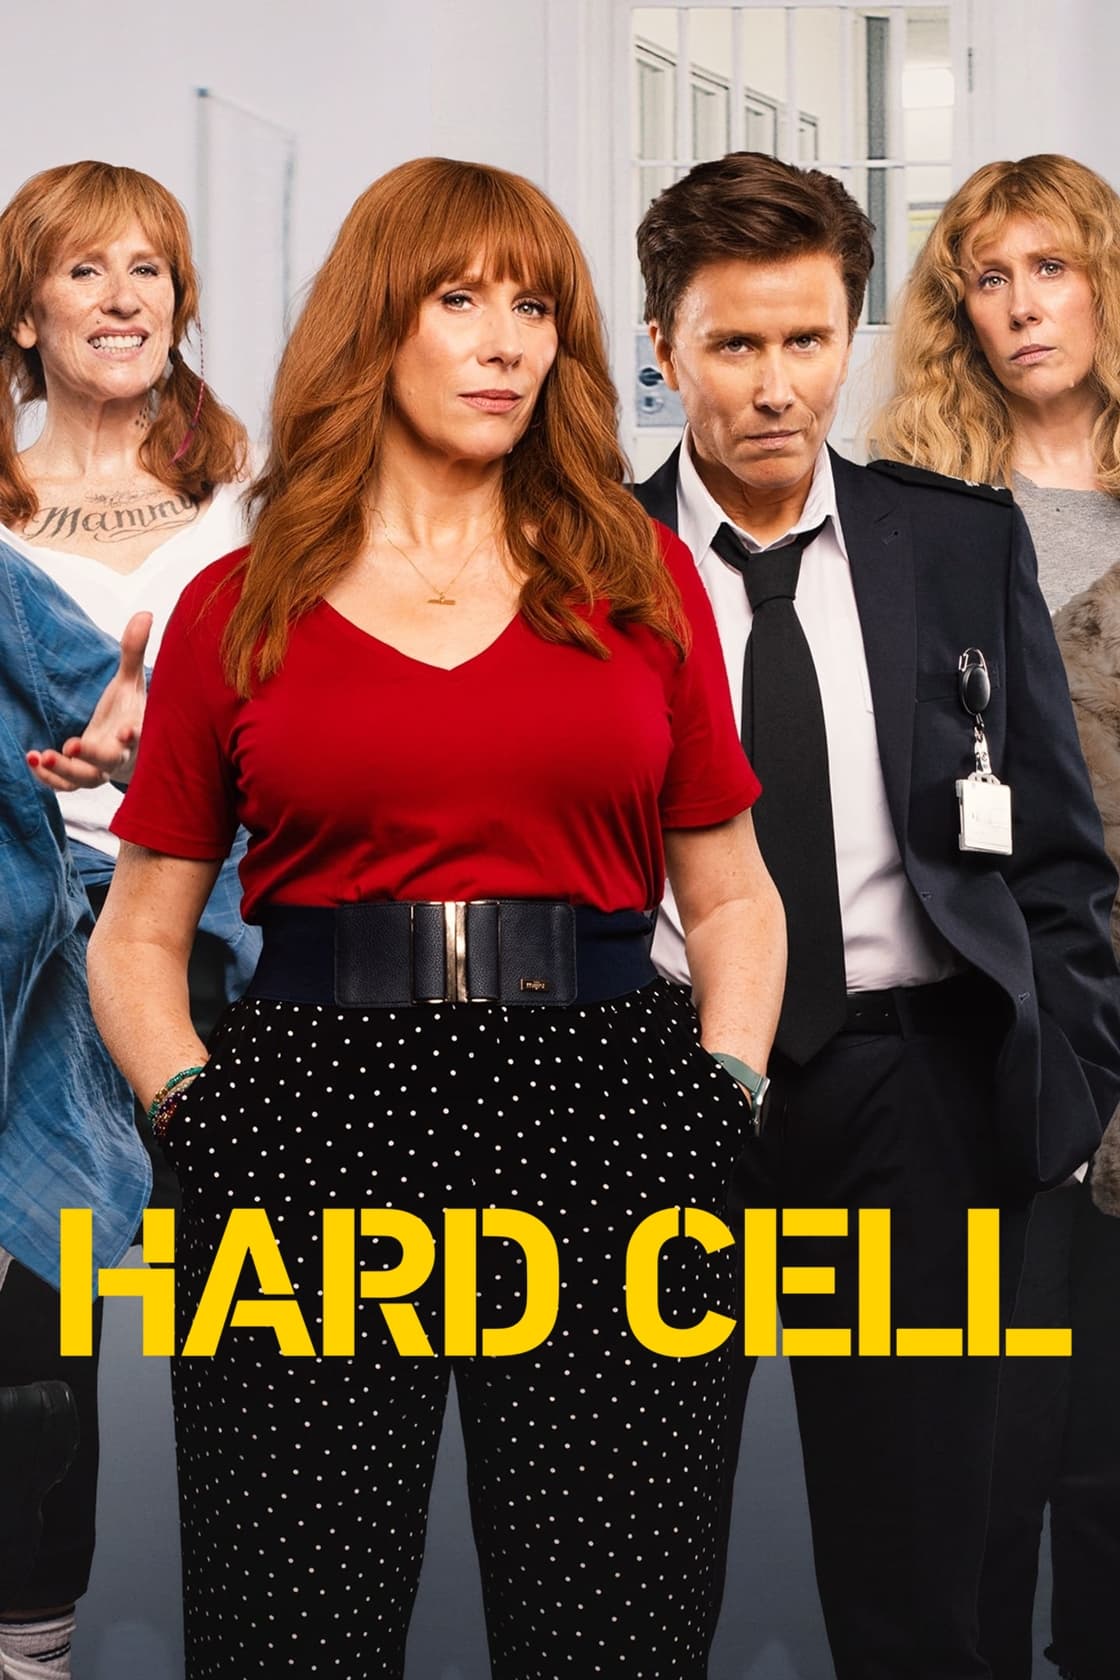 Hard Cell TV Shows About Prison